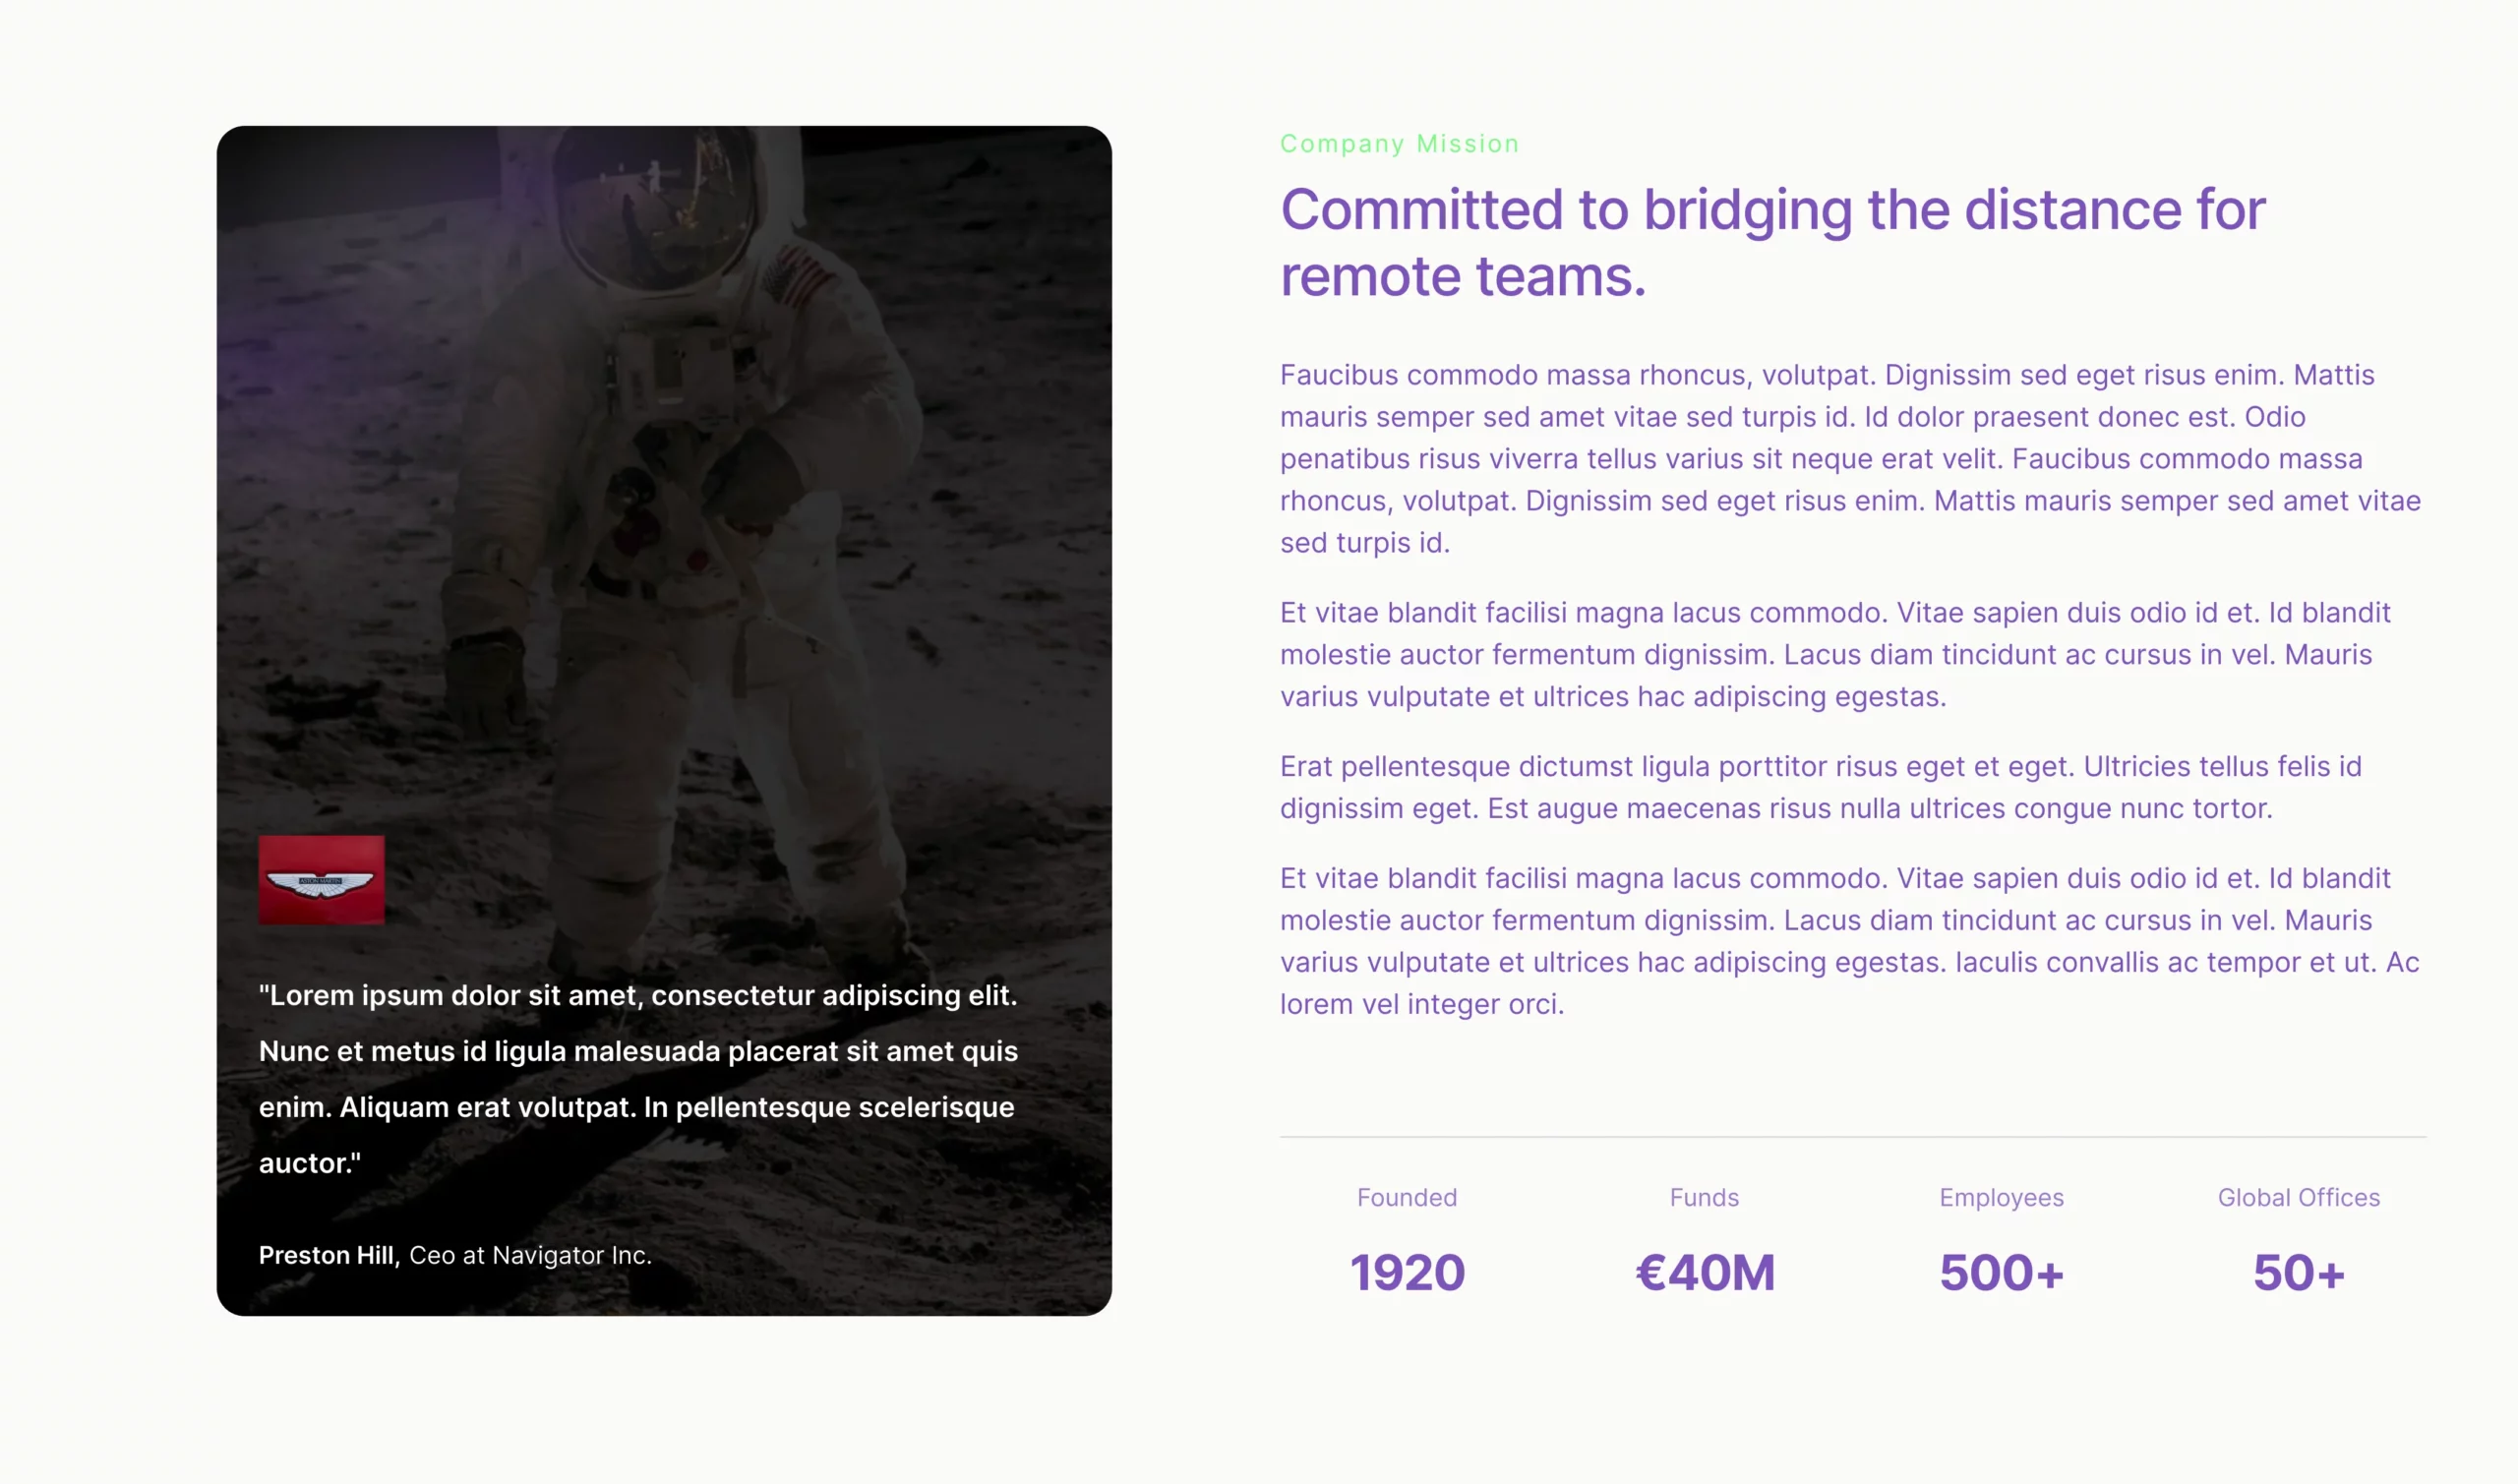 With full testimonial and stats Bootstrap 5 components